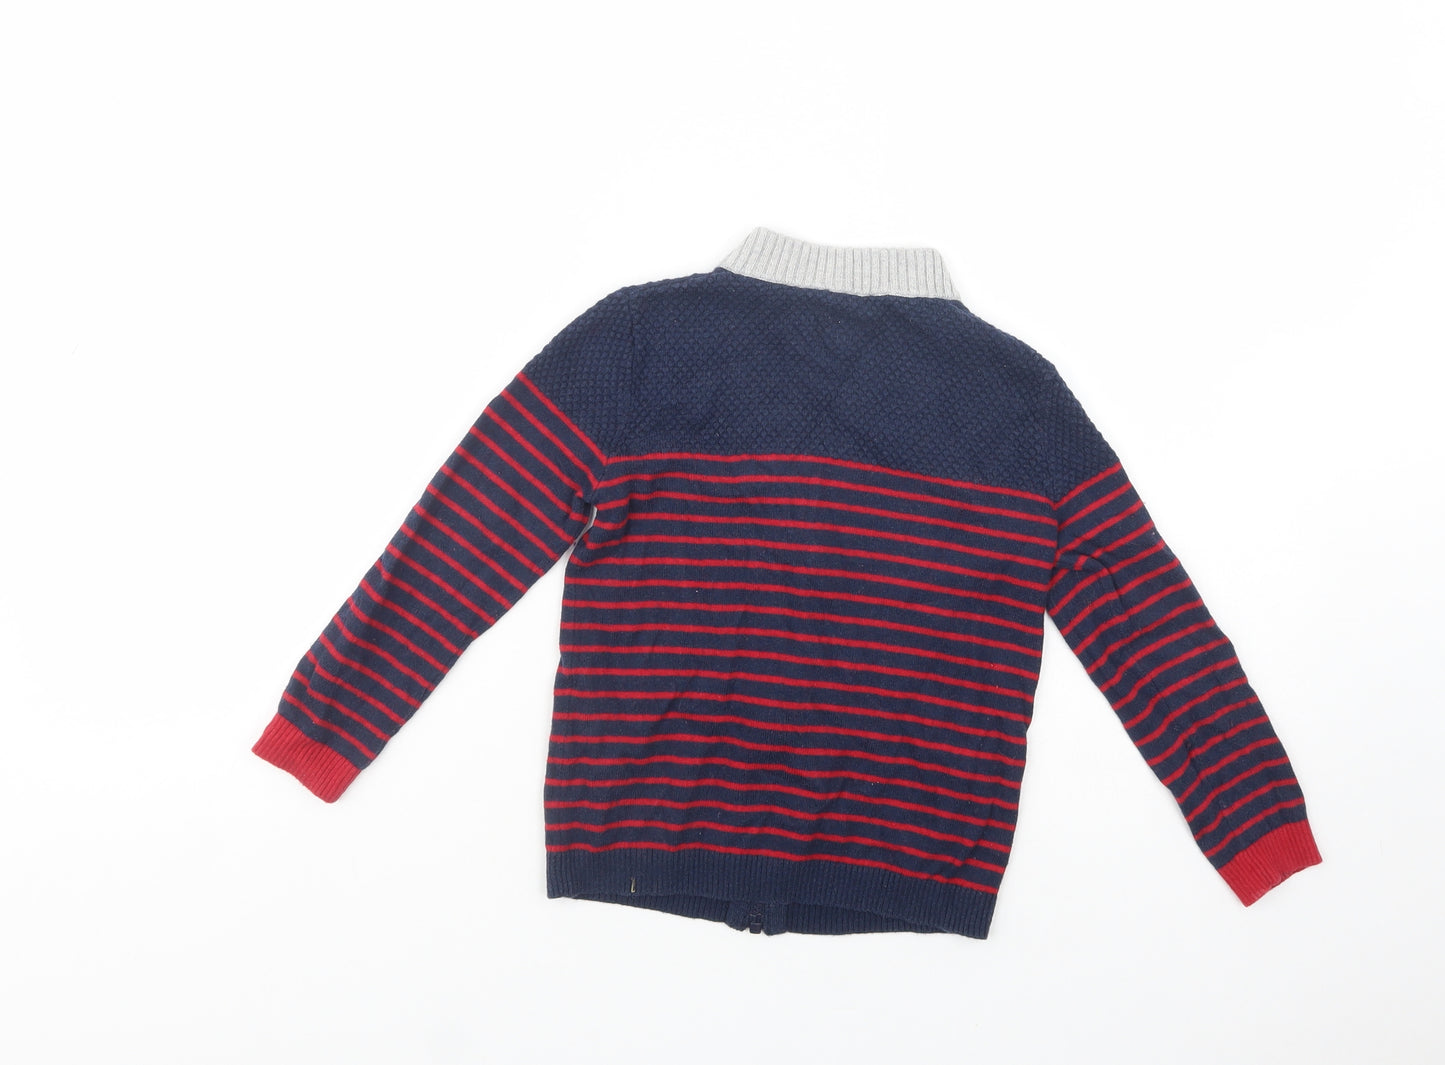 United Colors of Benetton Boys Blue High Neck Striped Cotton Full Zip Jumper Size 4-5 Years  Zip